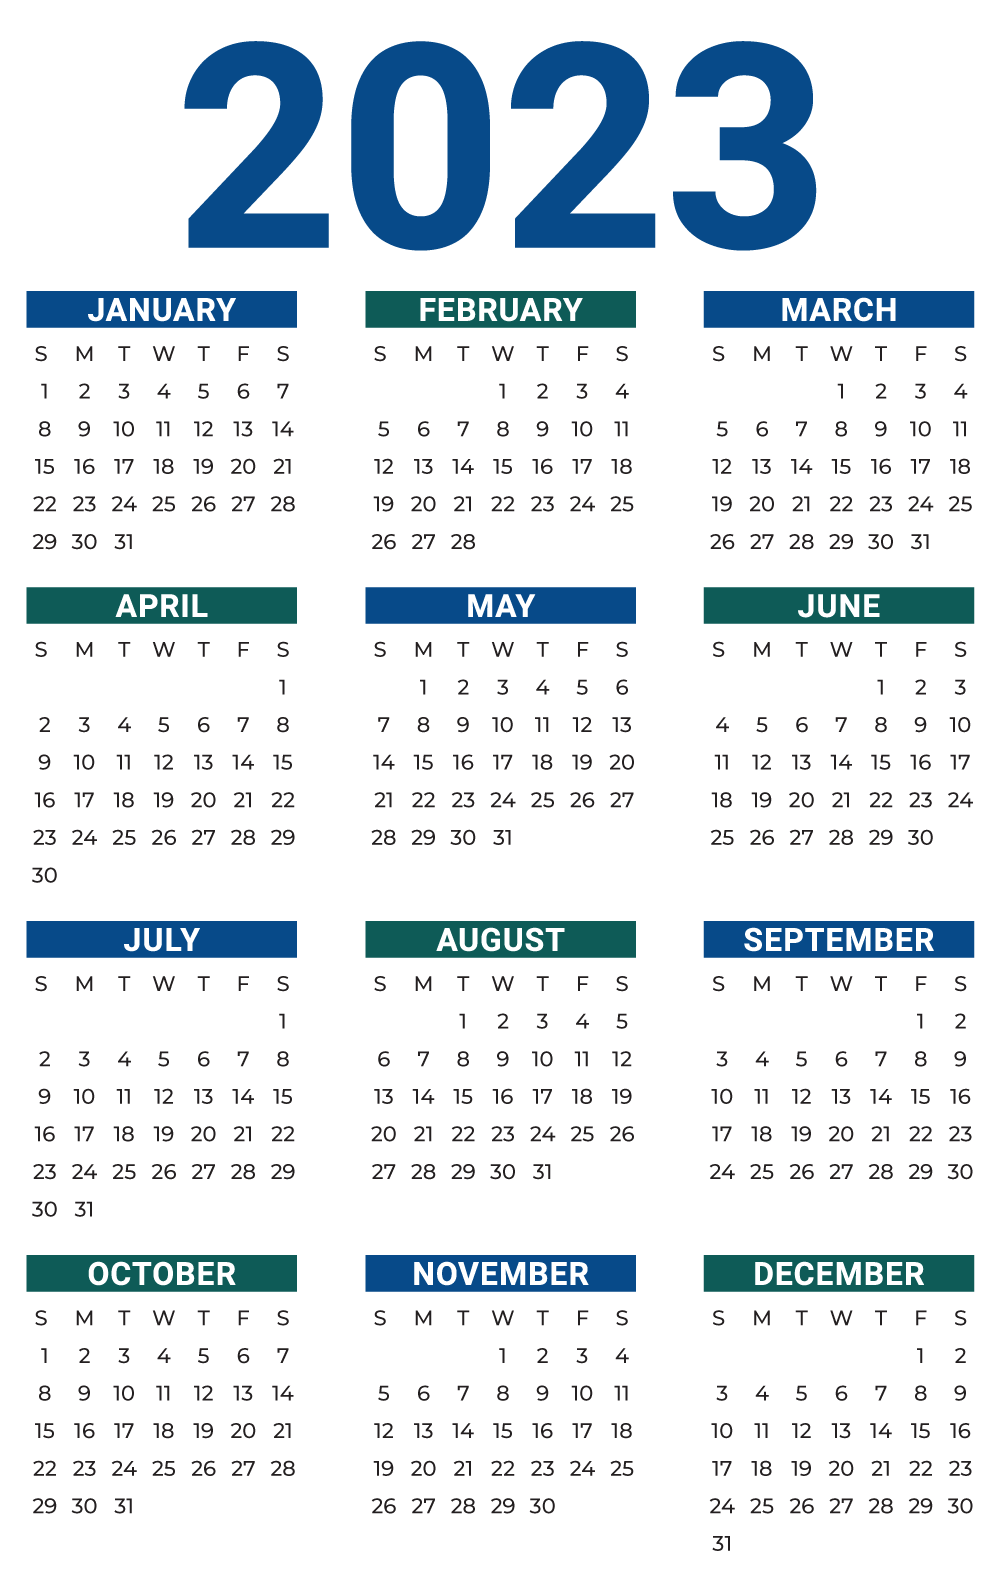 Picture of the 2023 calendar.